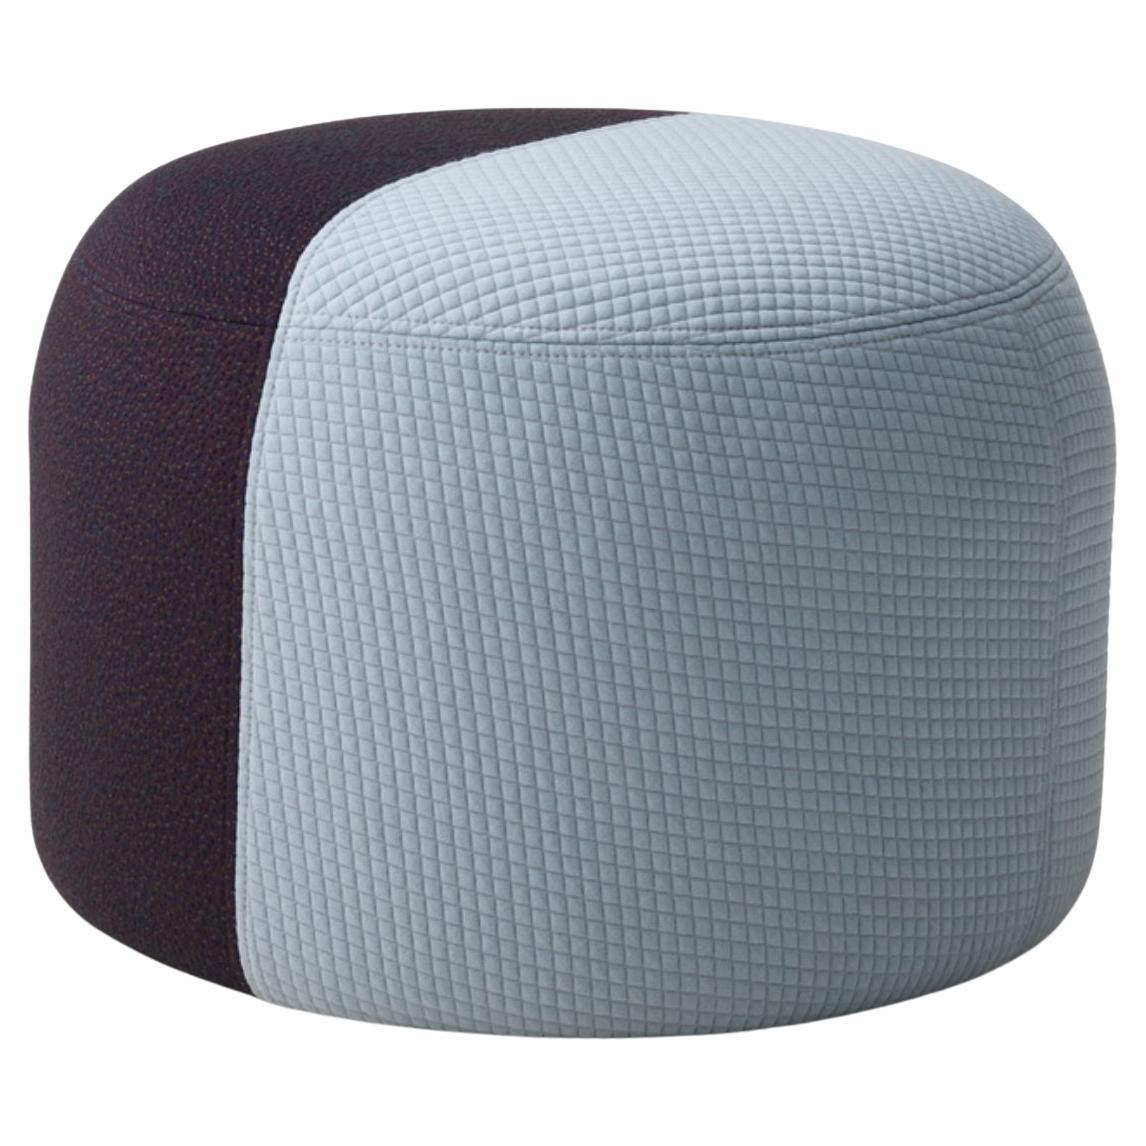 Dainty Pouf Mosaic Light Blue, Eggplant by Warm Nordic For Sale